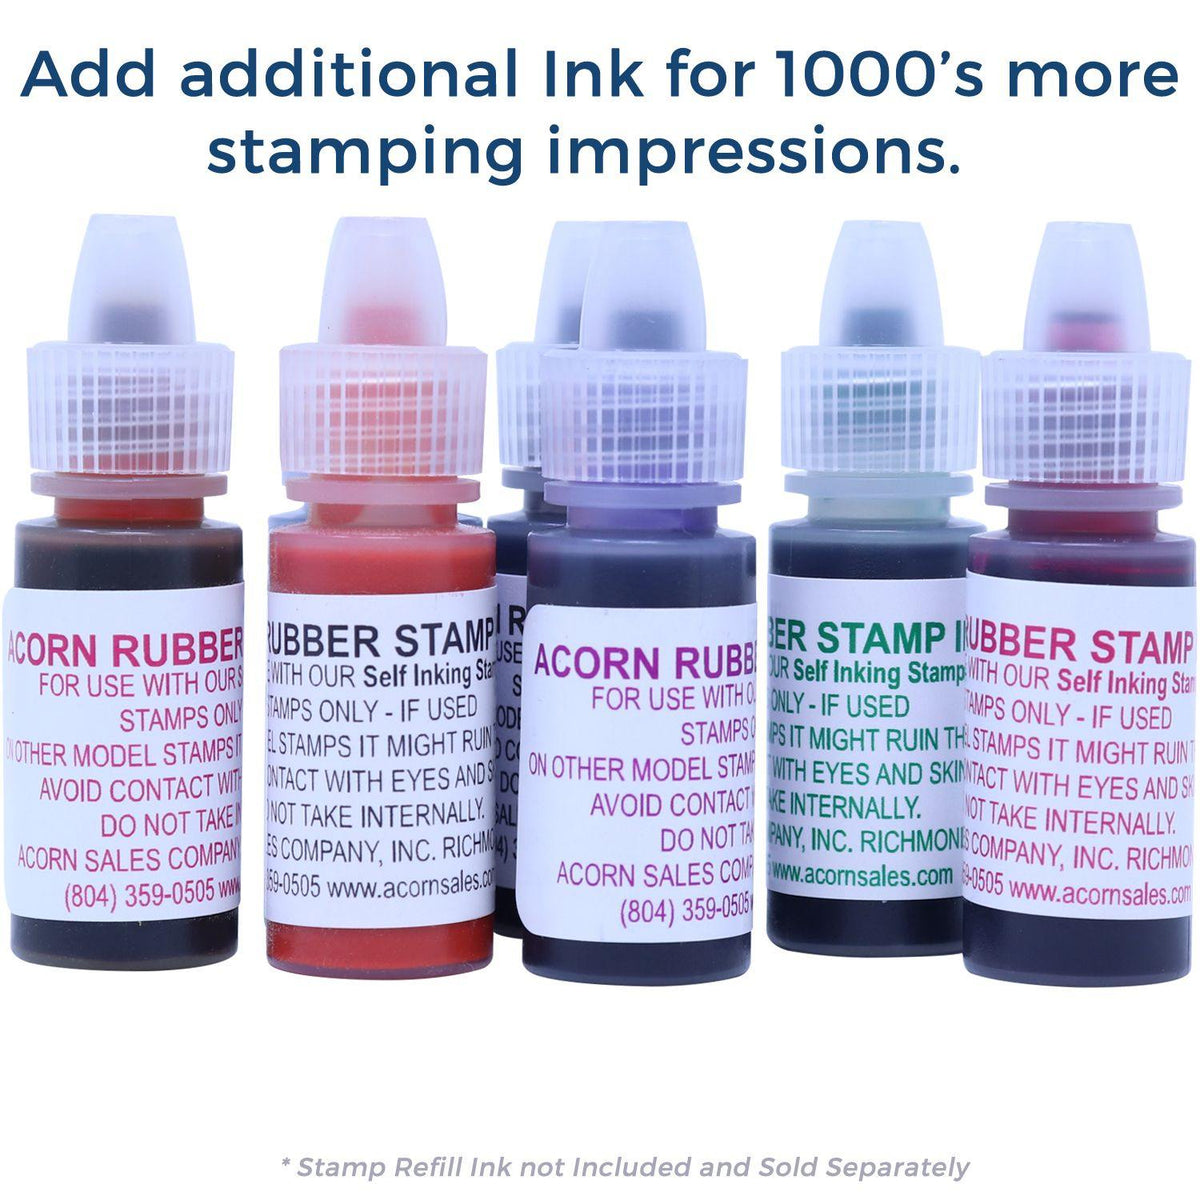 Refill Inks for Large Pre-Inked Bold Covid-19 Stamp Available